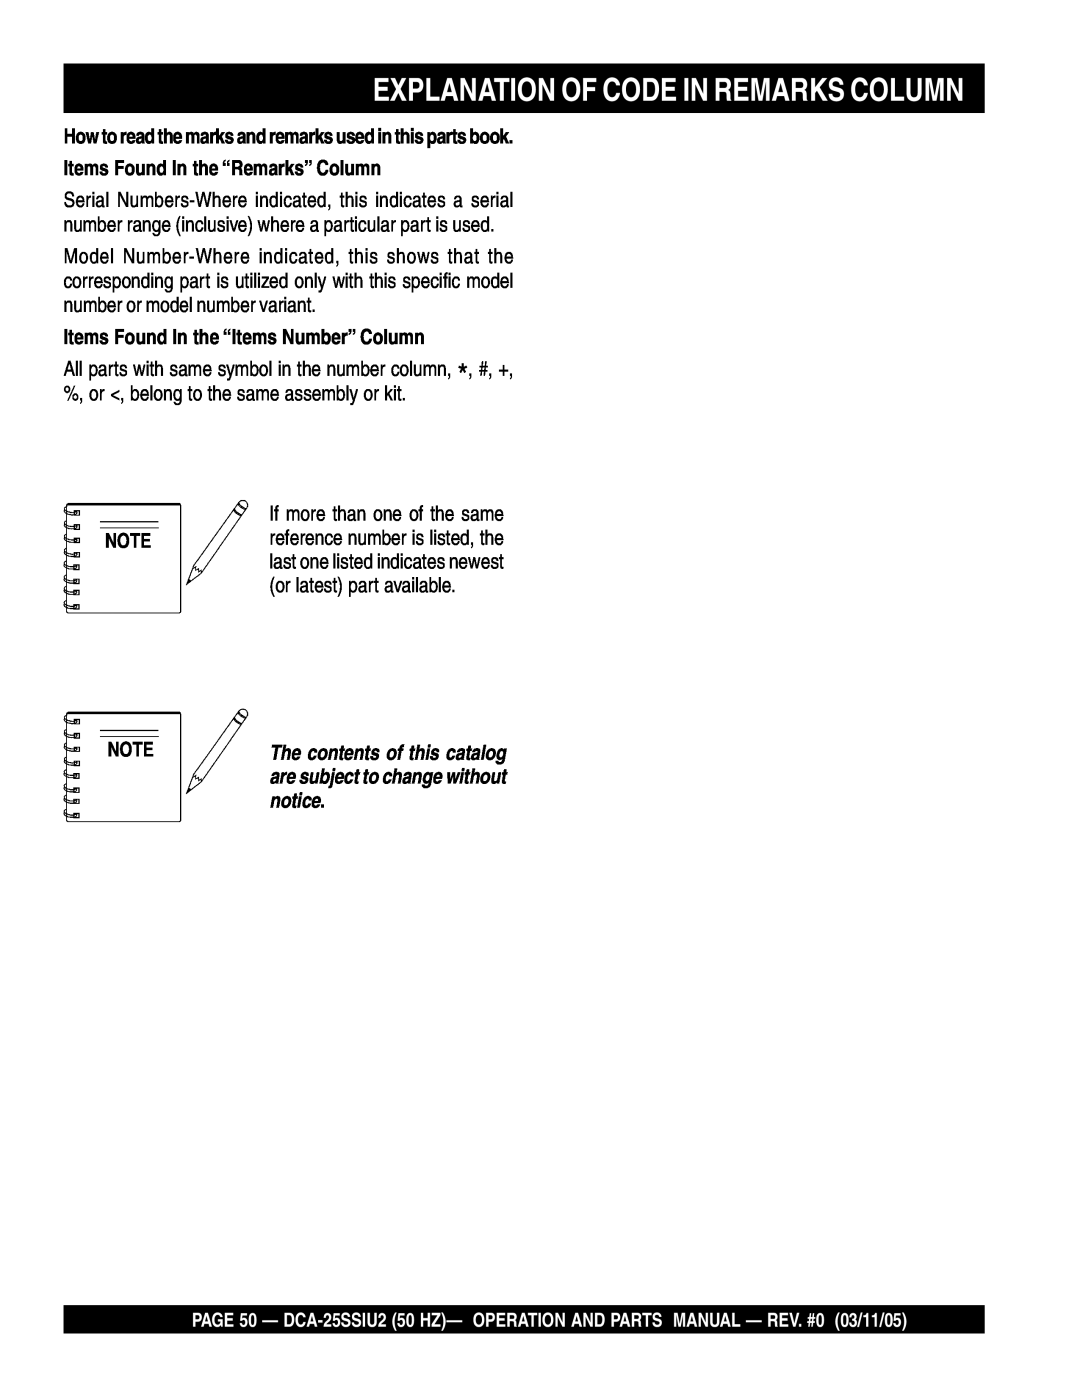 Multiquip DCA-25SSIU2 Explanation Of Code In Remarks Column, How to read the marks and remarks used in this parts book 